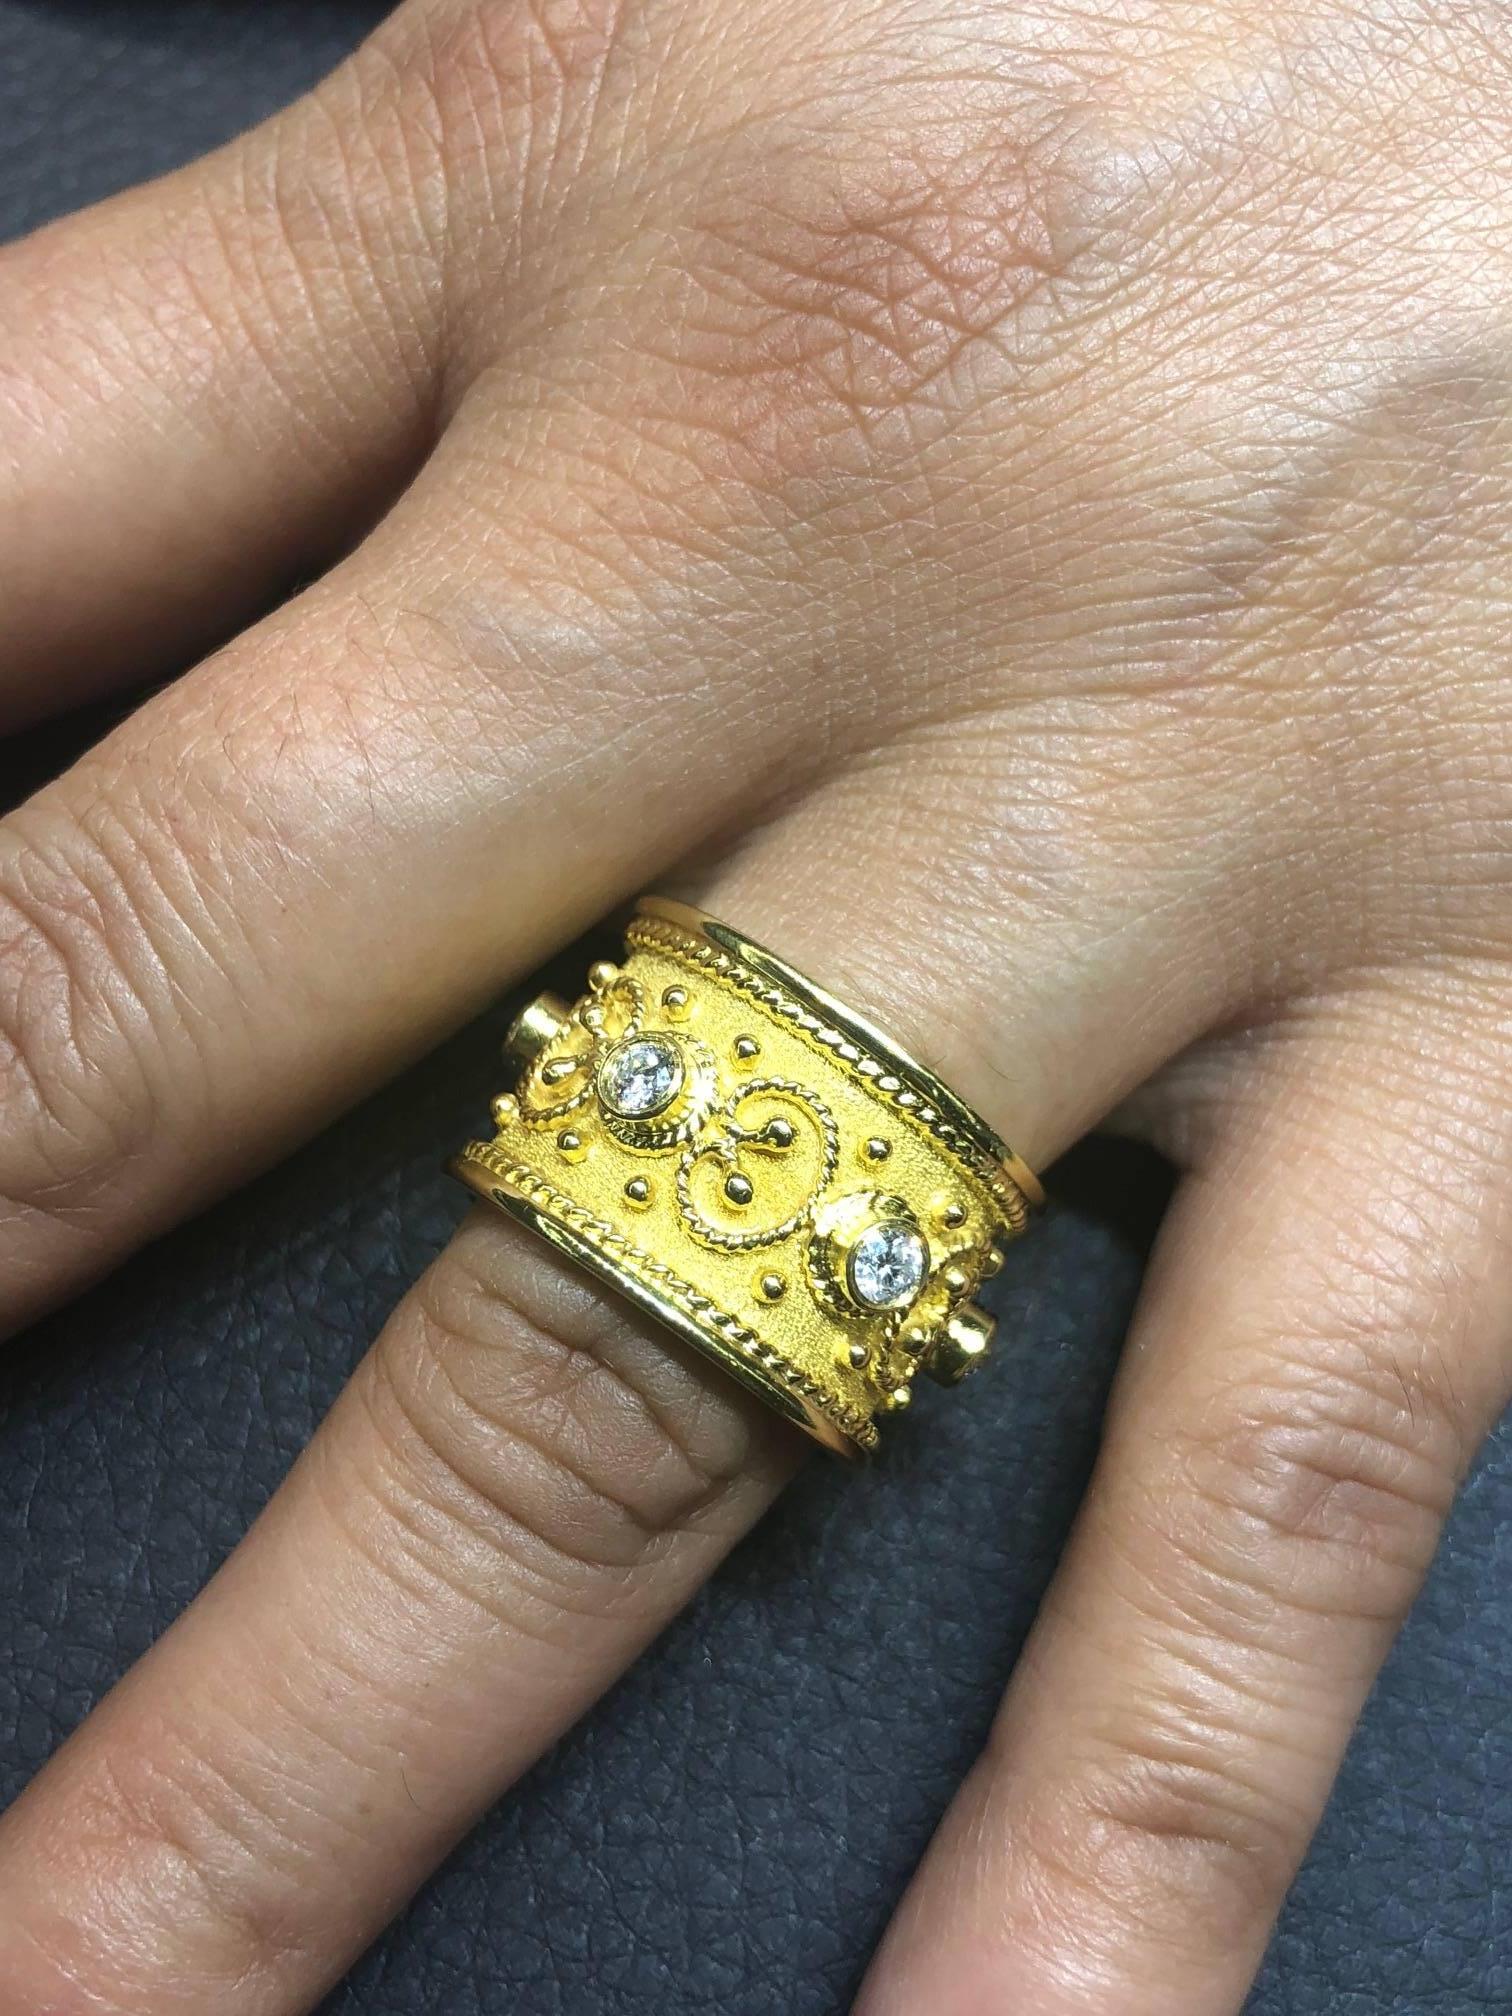 S.Georgios design ring is handmade from solid 18 Karat Yellow Gold. The ring is microscopically decorated all the way around with gold beads and wires shaped like the last letter of Greek Alphabet - Omega, which symbolizes eternal life. Granulated